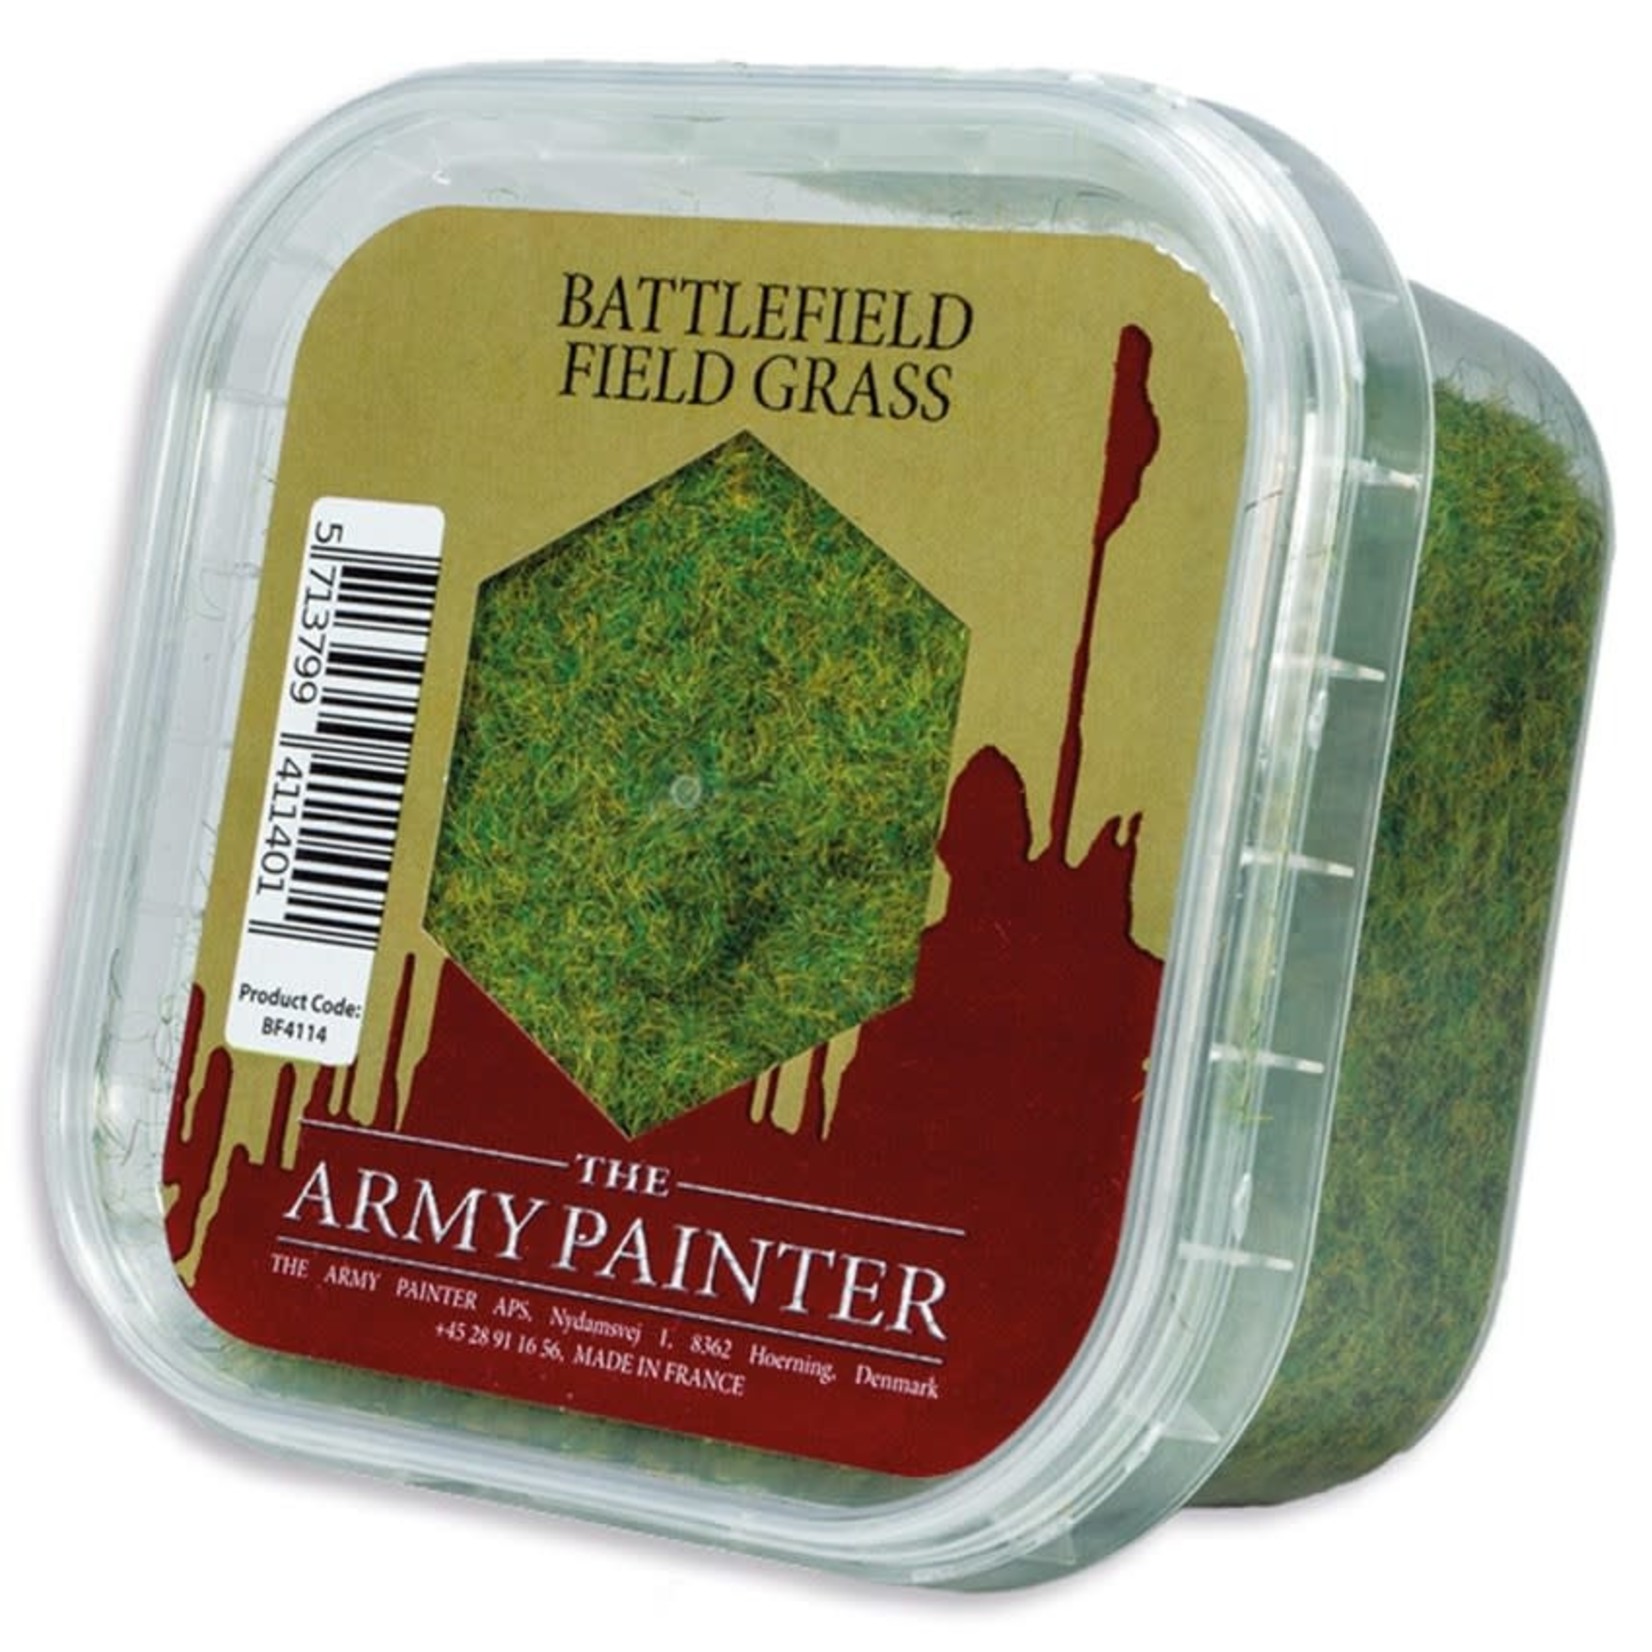 The Army Painter The Army Painter Battlefield Field Grass